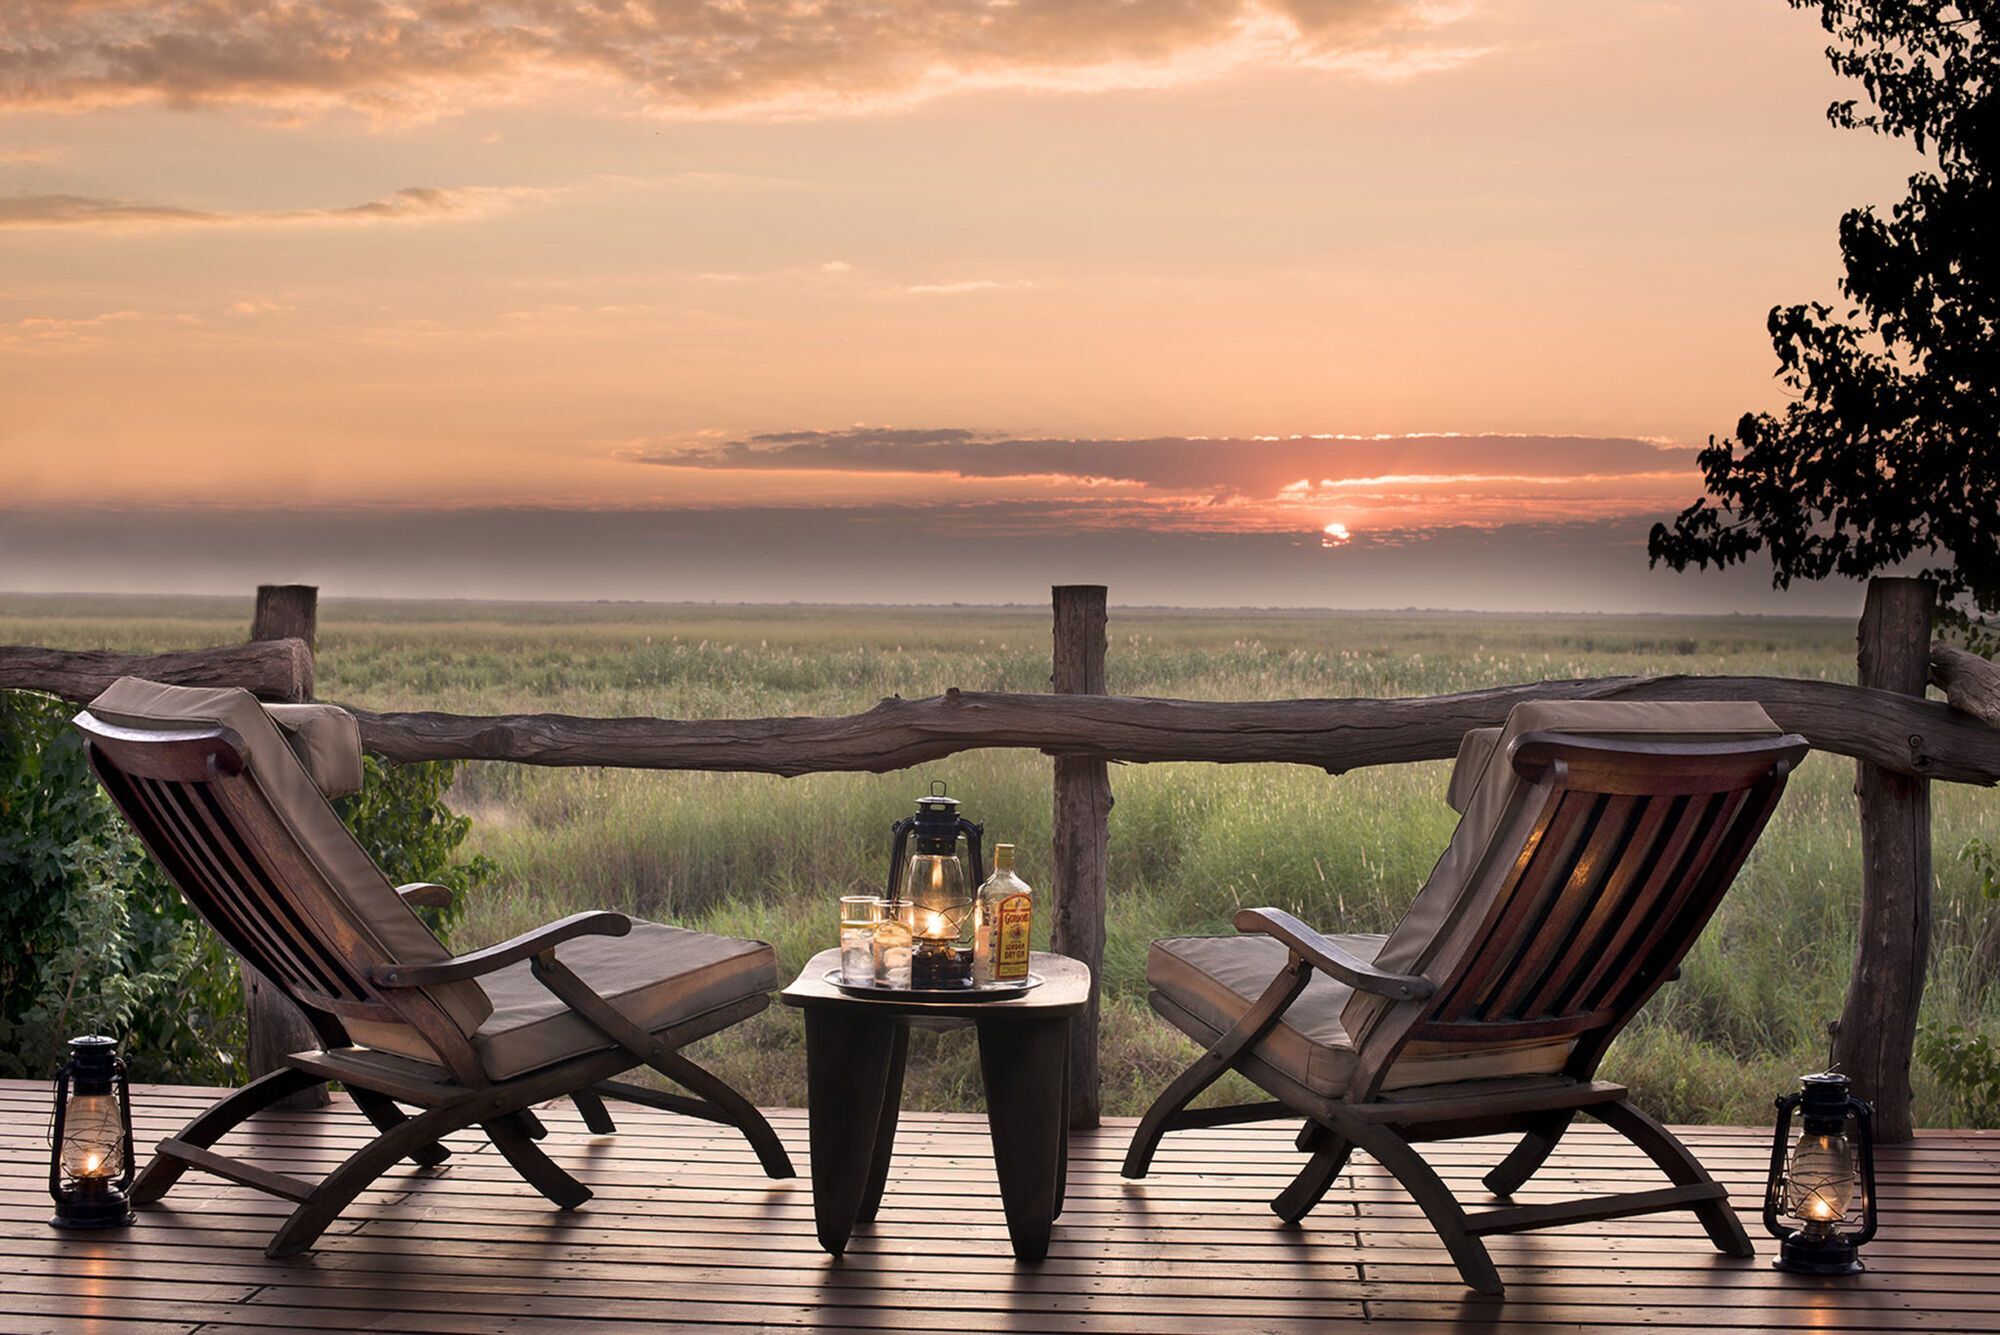 Linyanti Bush Camp: a safari in Botswana that offers an unforgettable experience